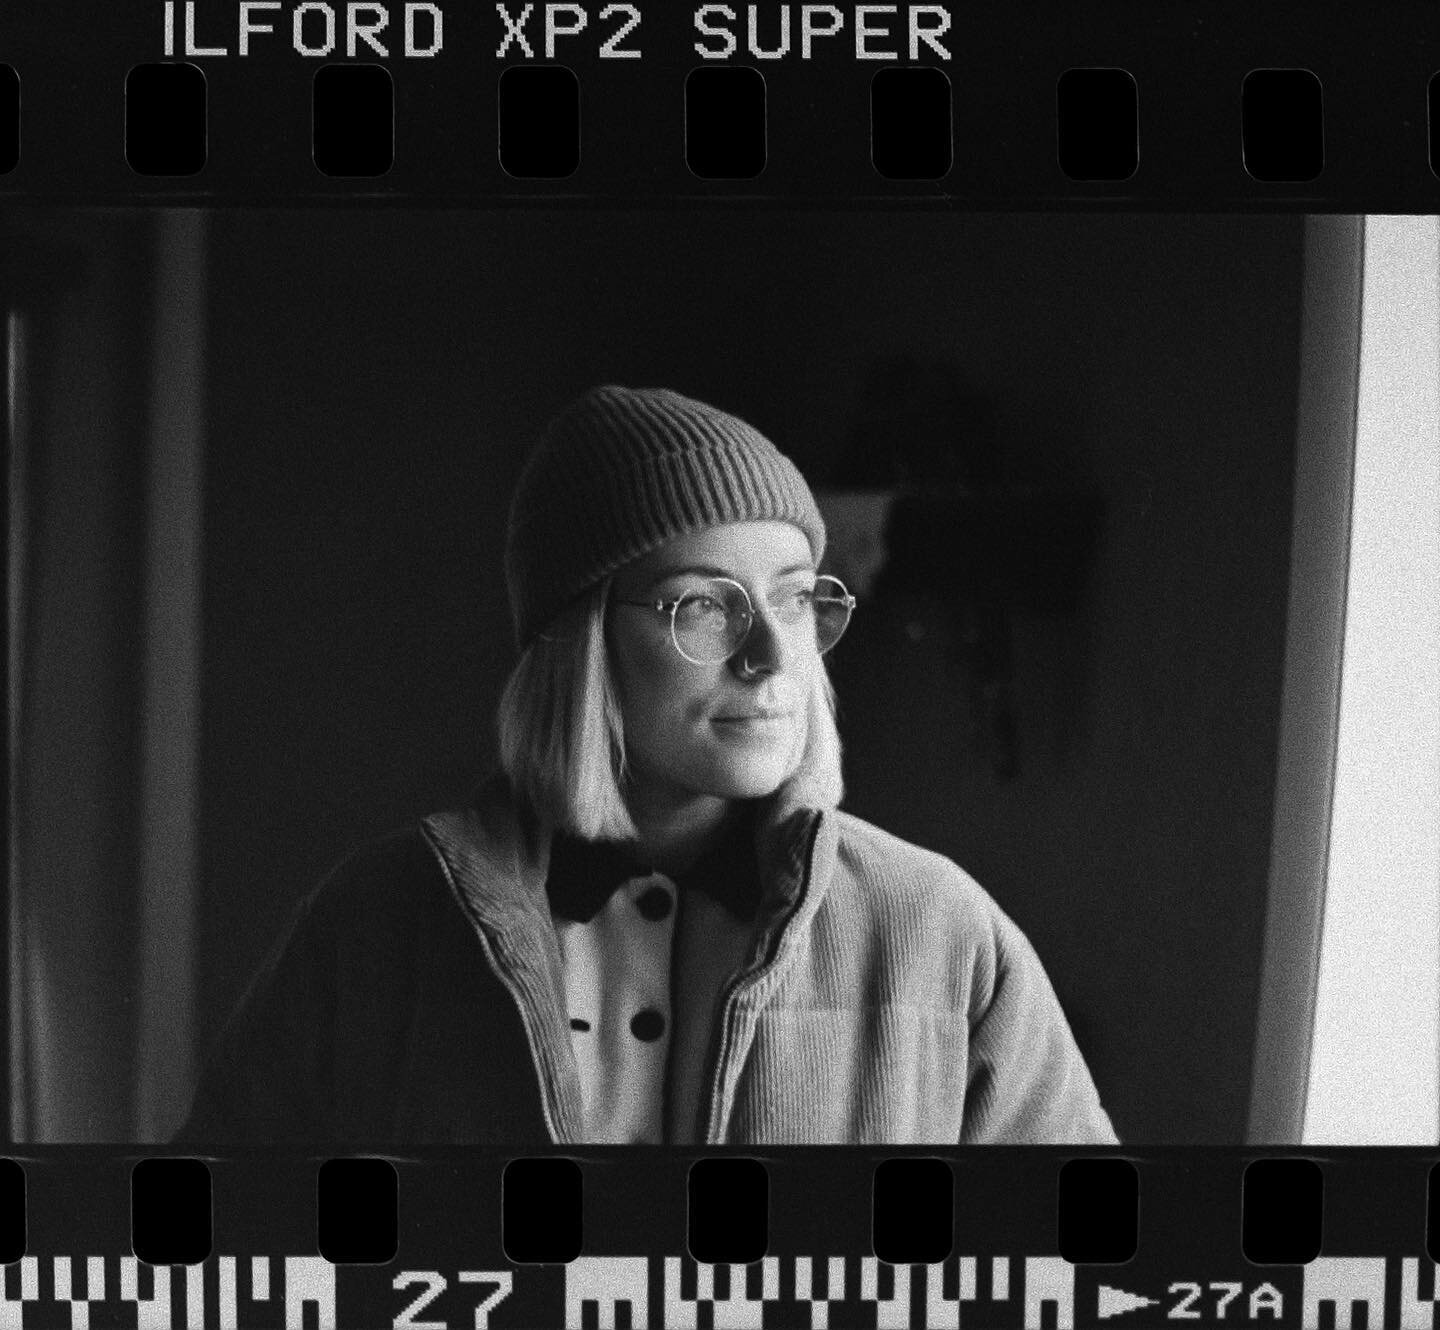 Film from the holidays. 
Extremely thankful to have you, @ohliviia. 
#ilfordxp2 #PentaxME #xp2super #ilford